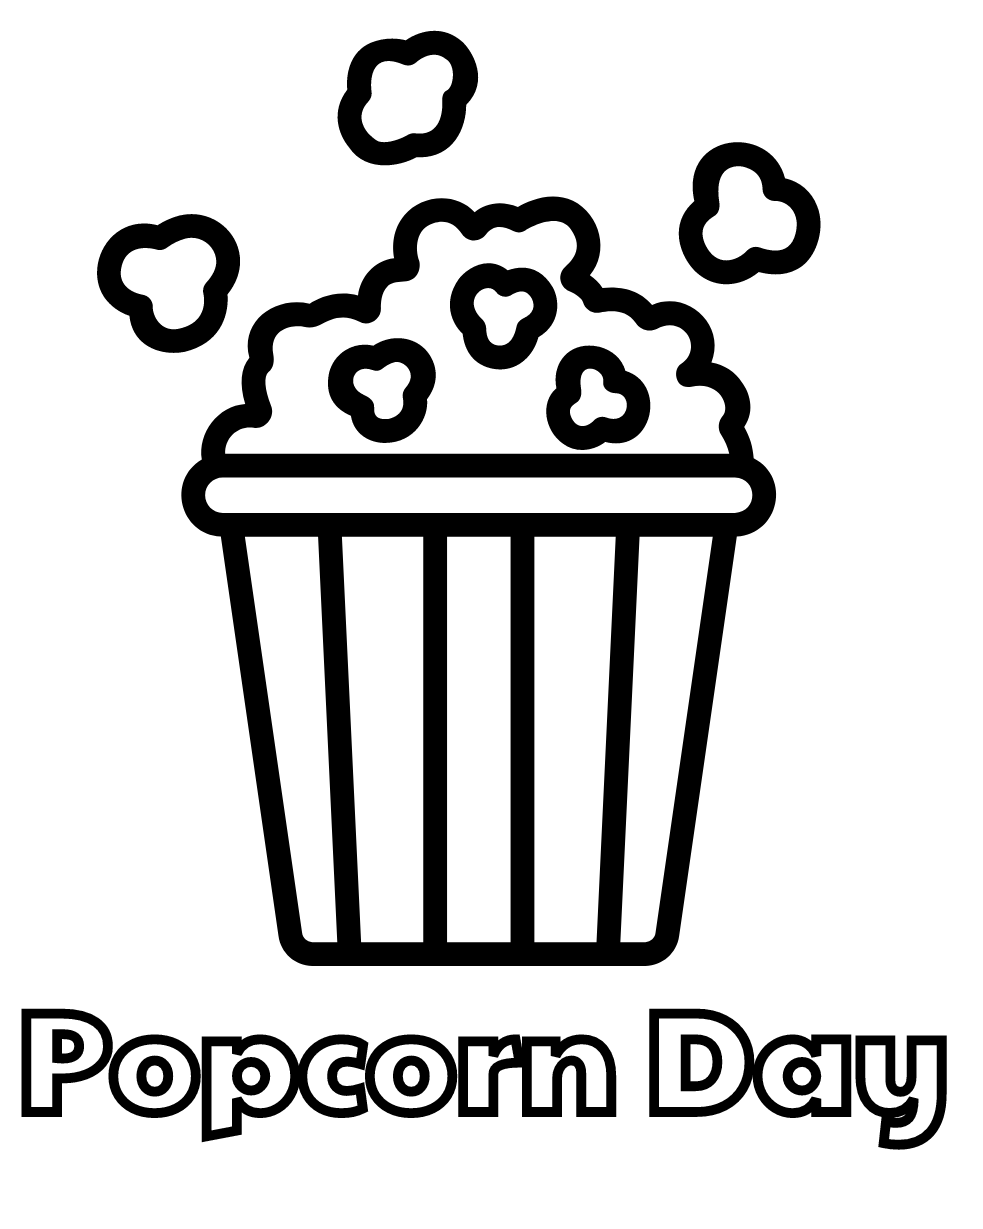 Popcorn Day Coloring Page